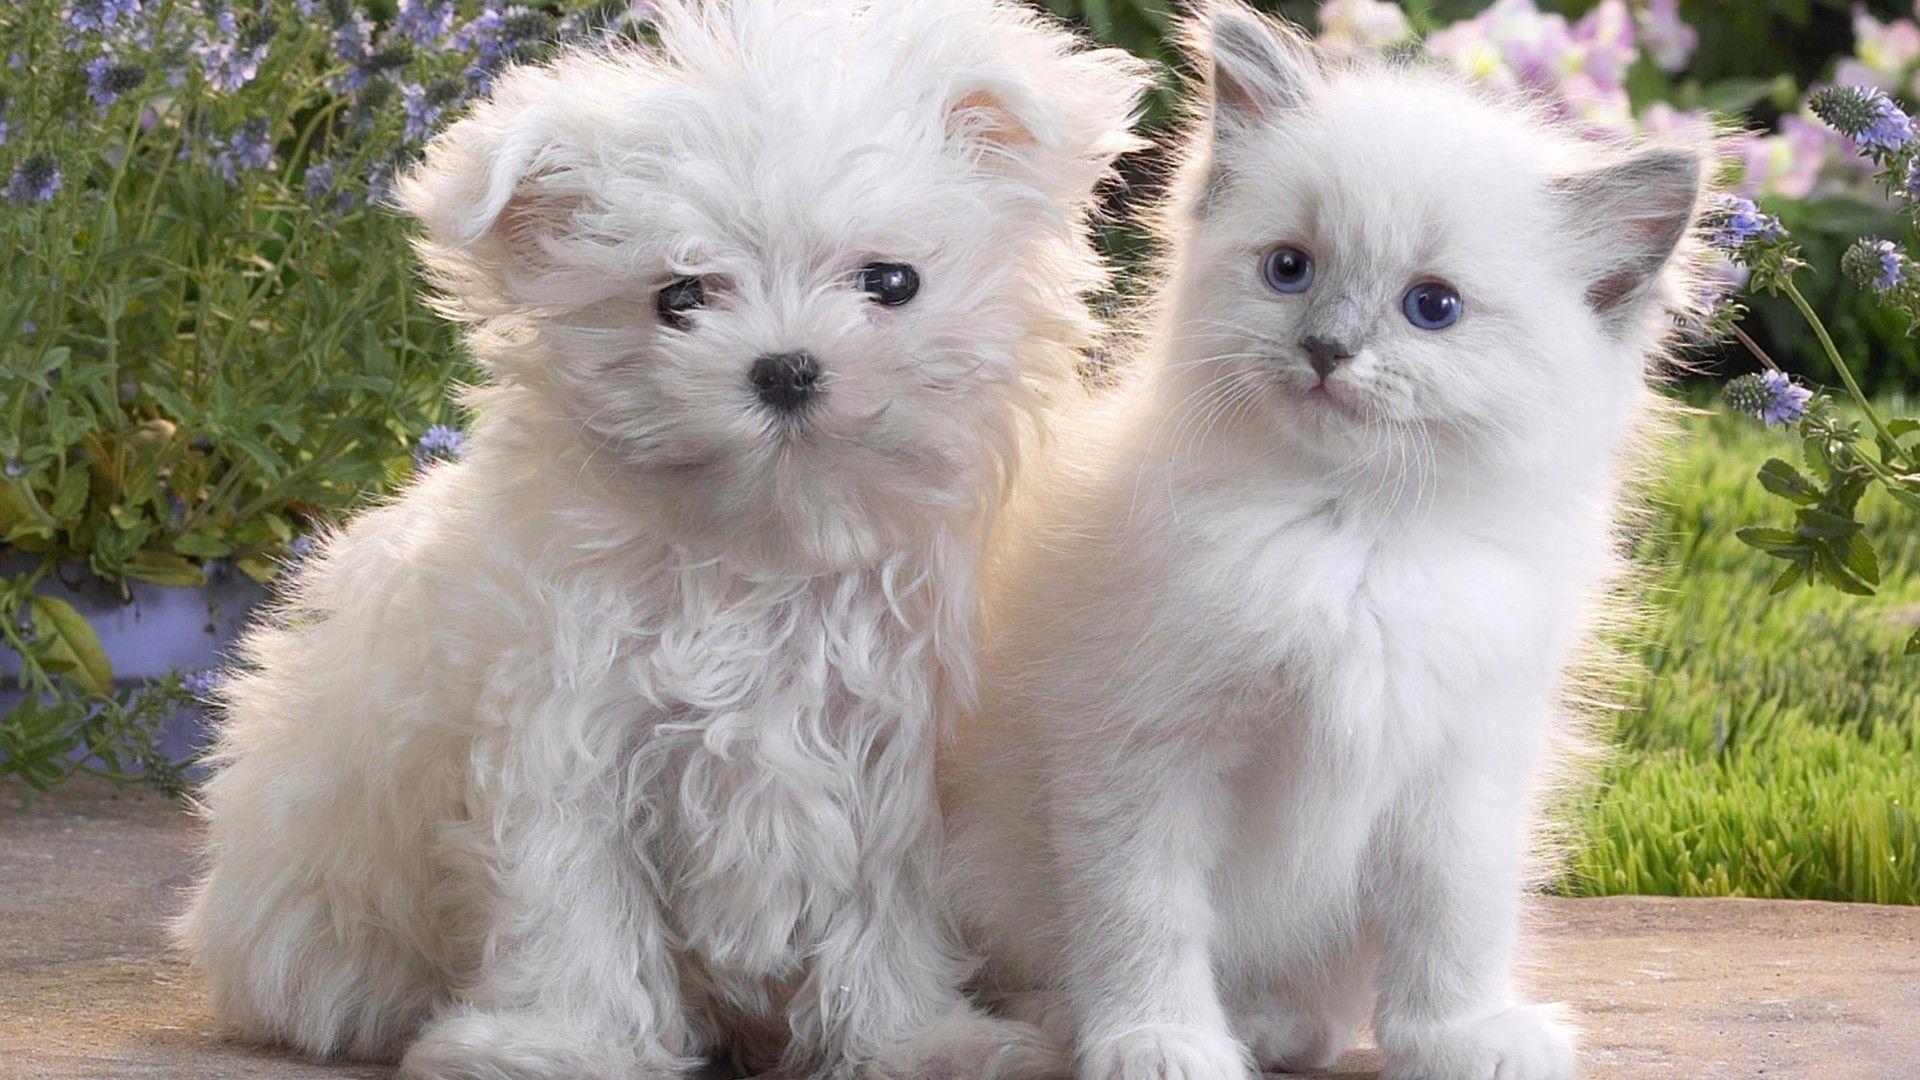 Puppies and Kittens Wallpaper for Laptop High Quality Download